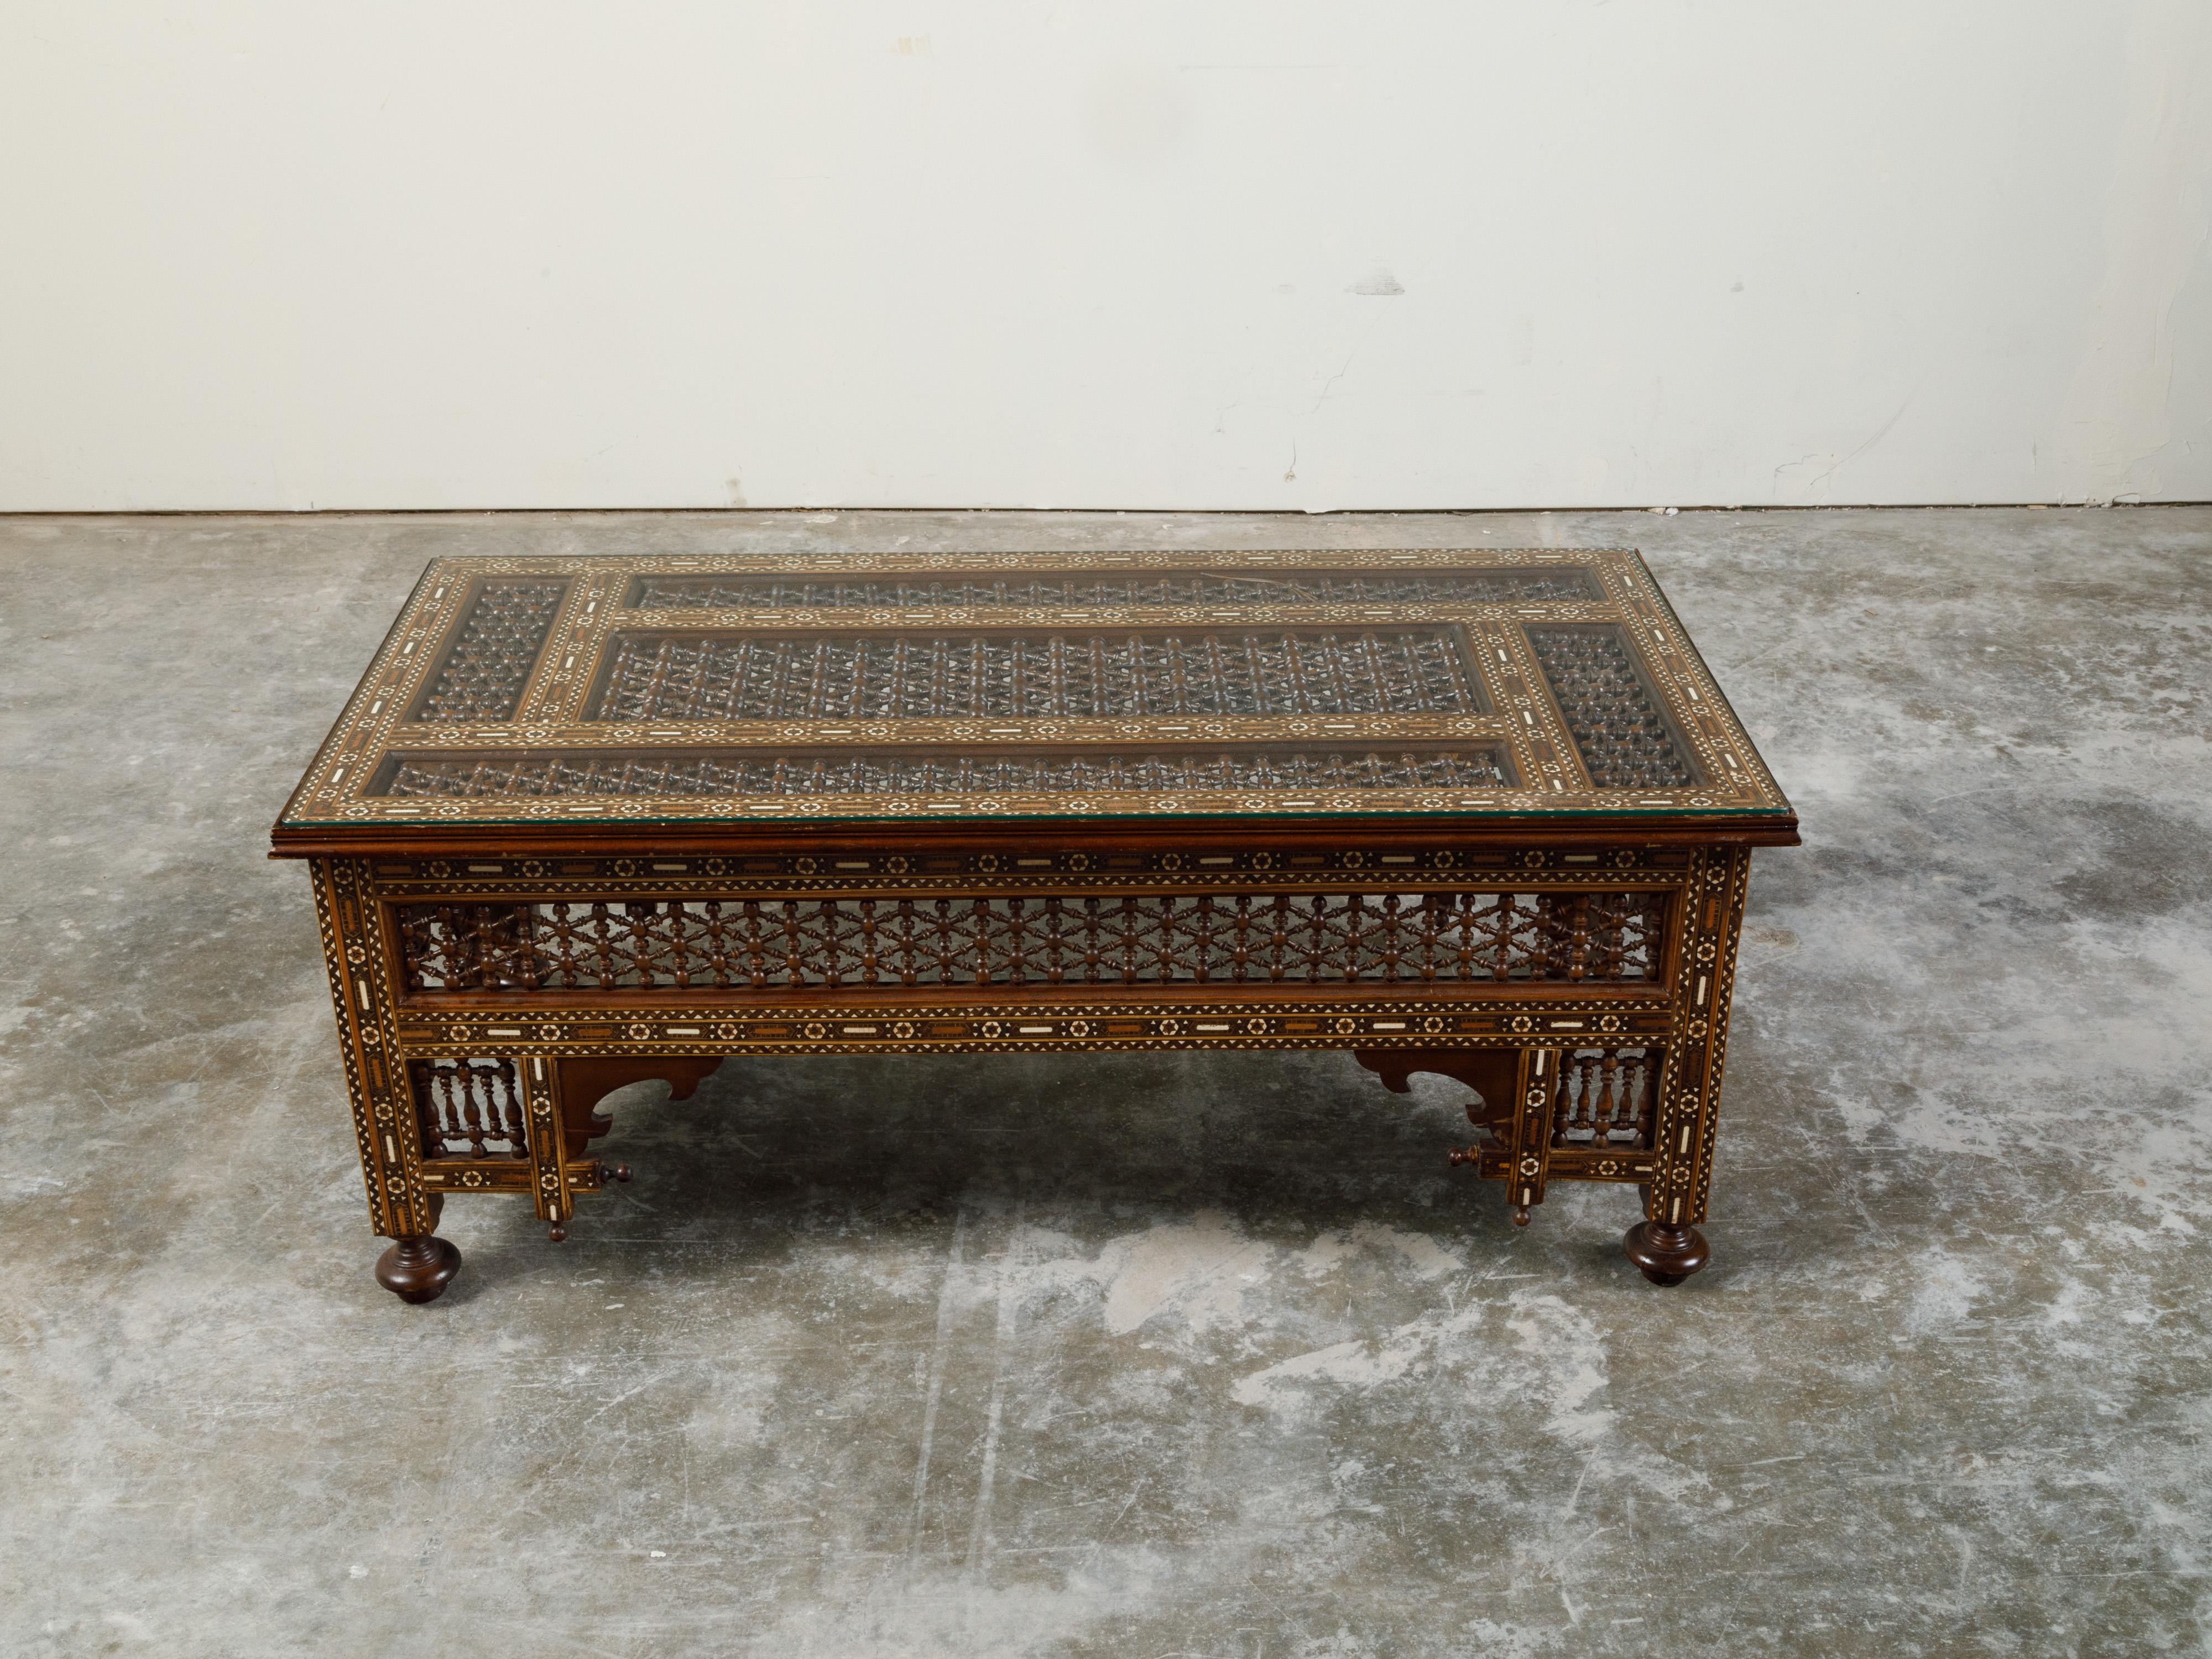 20th Century Anglo-Indian Glass Top Coffee Table with Mother of Pearl Inlay and Turned Motifs